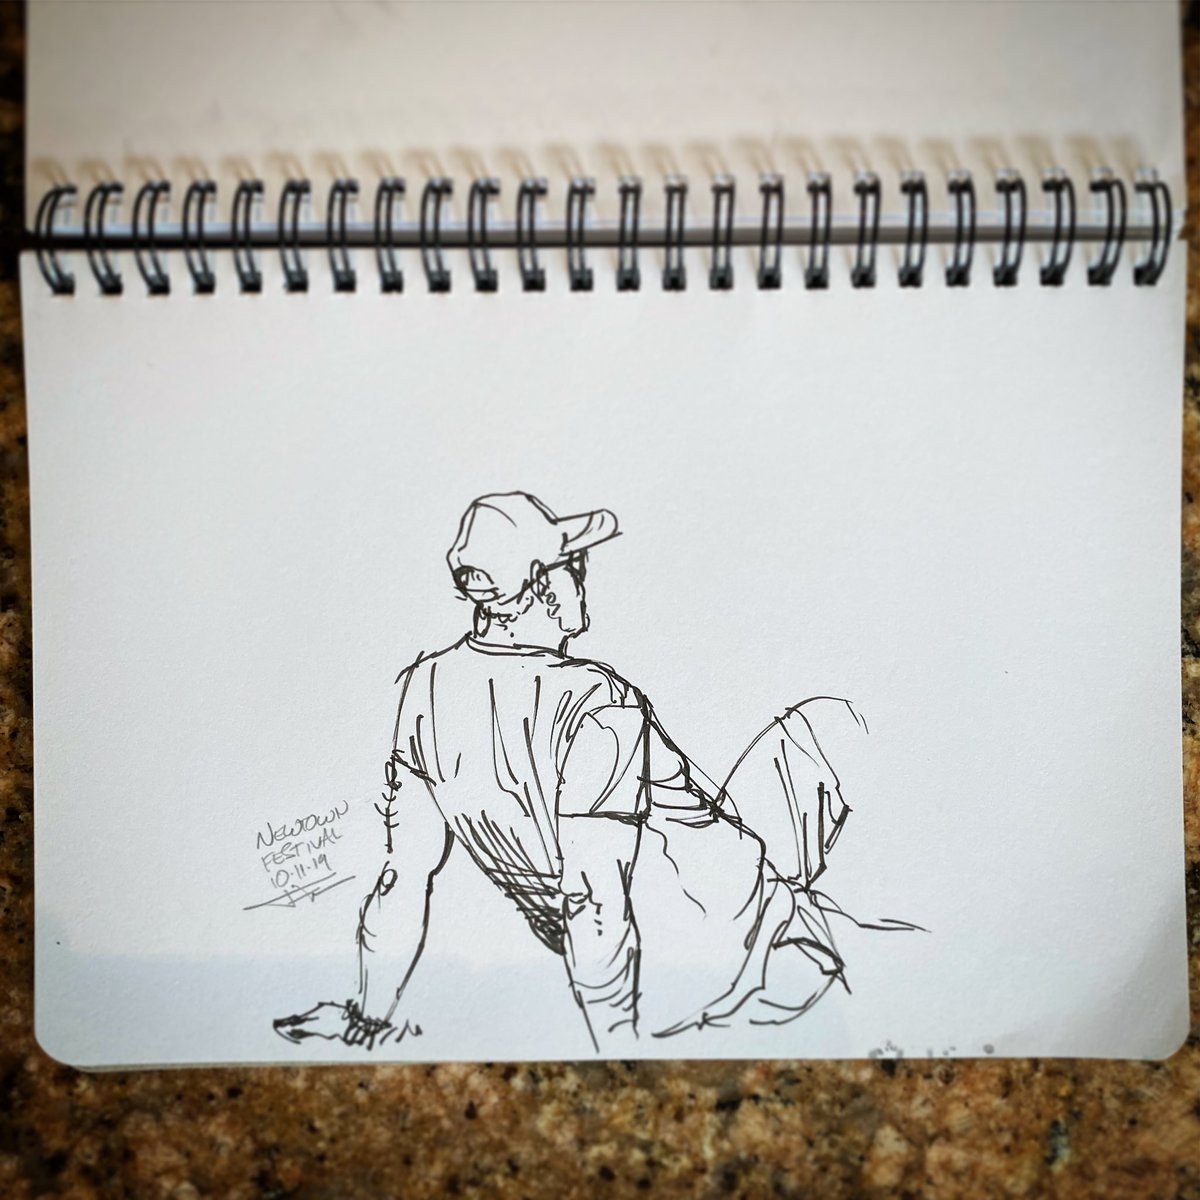 An audience member at a @SCABZARESHIT set at Newtown Festival earlier this month. #gigsketch #gigsketchers #gigsketches #gig #livemusic #indiemusic #ausmusic #australianmusic #aussiemusic #australianmusicscene #ausmusicscene #aussiemusicscene #sydneymusic #sydneymusicscene #scabz